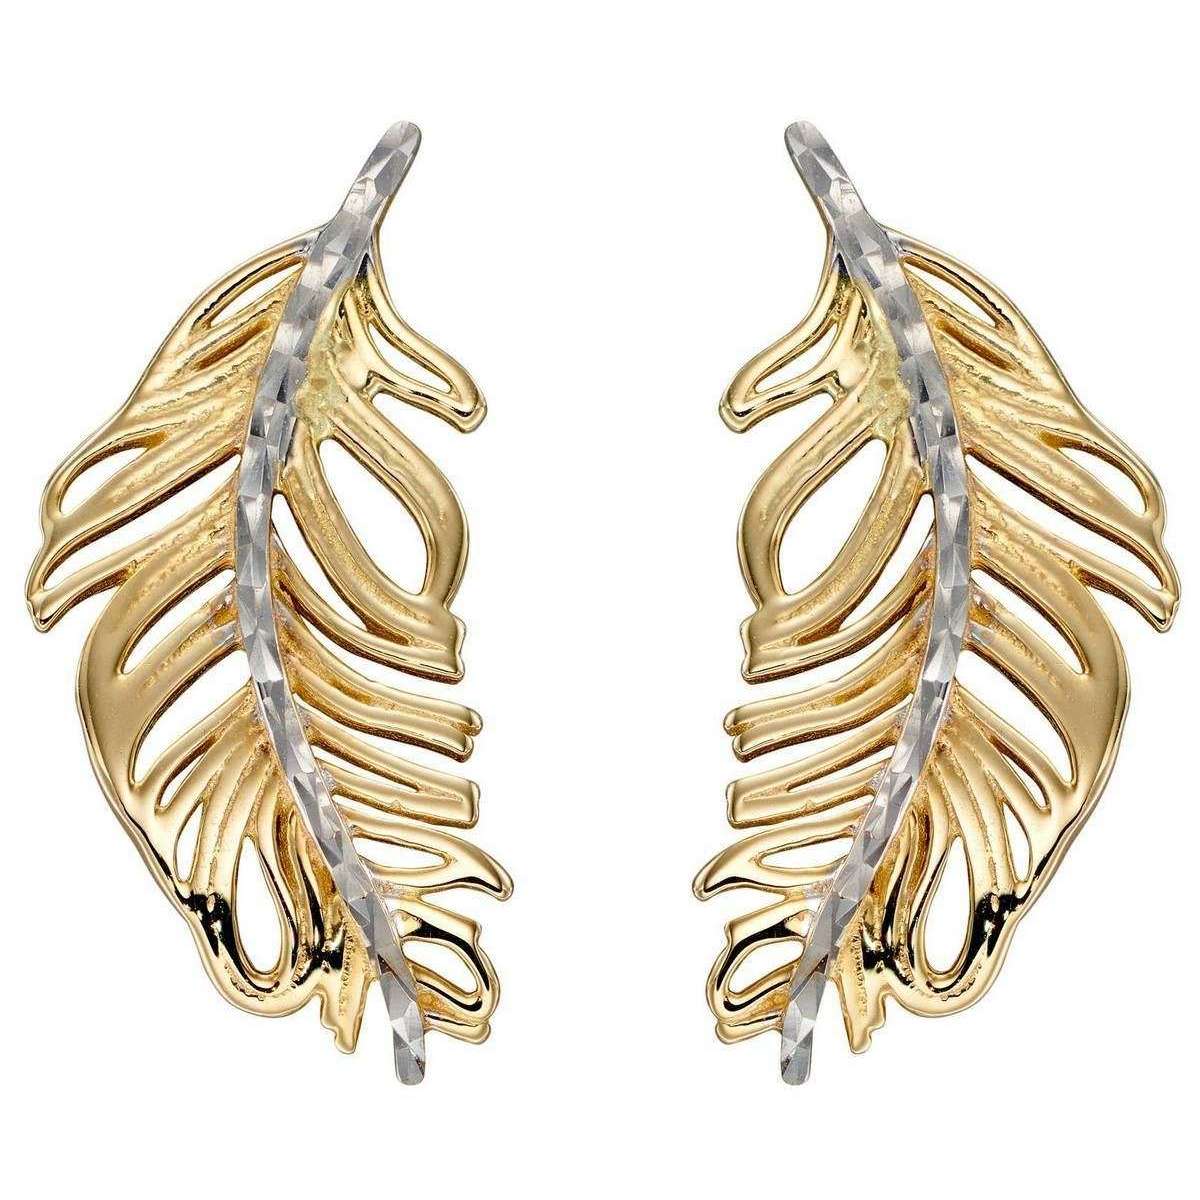 Elements Gold Feather Earrings - Gold/White Gold